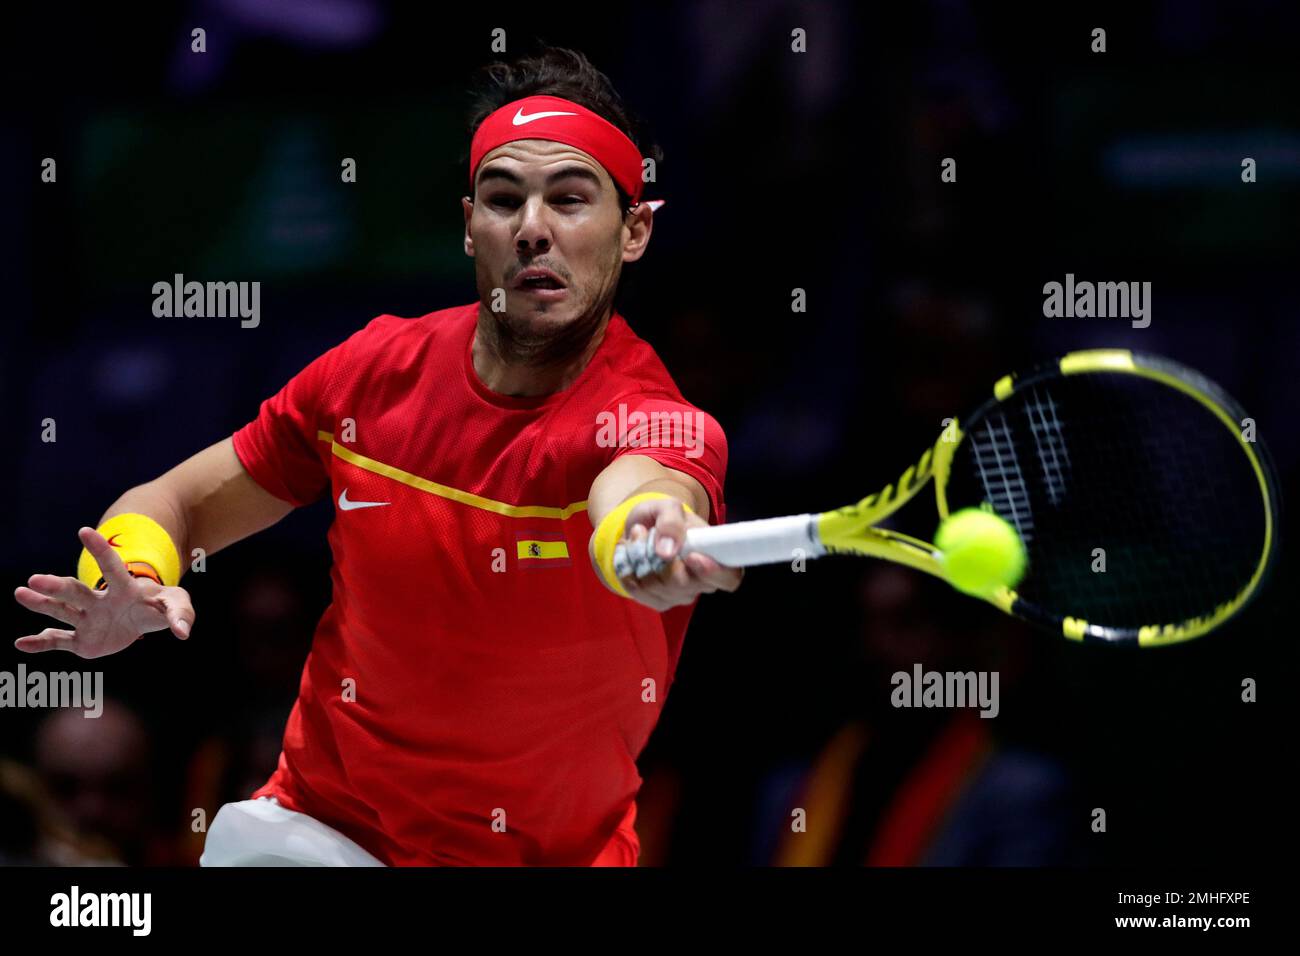 Spains Rafael Nadal hits a forehand to Canadas Denis Shapovalov during their tennis singles match of the Davis Cup final in Madrid, Spain, Sunday, Nov